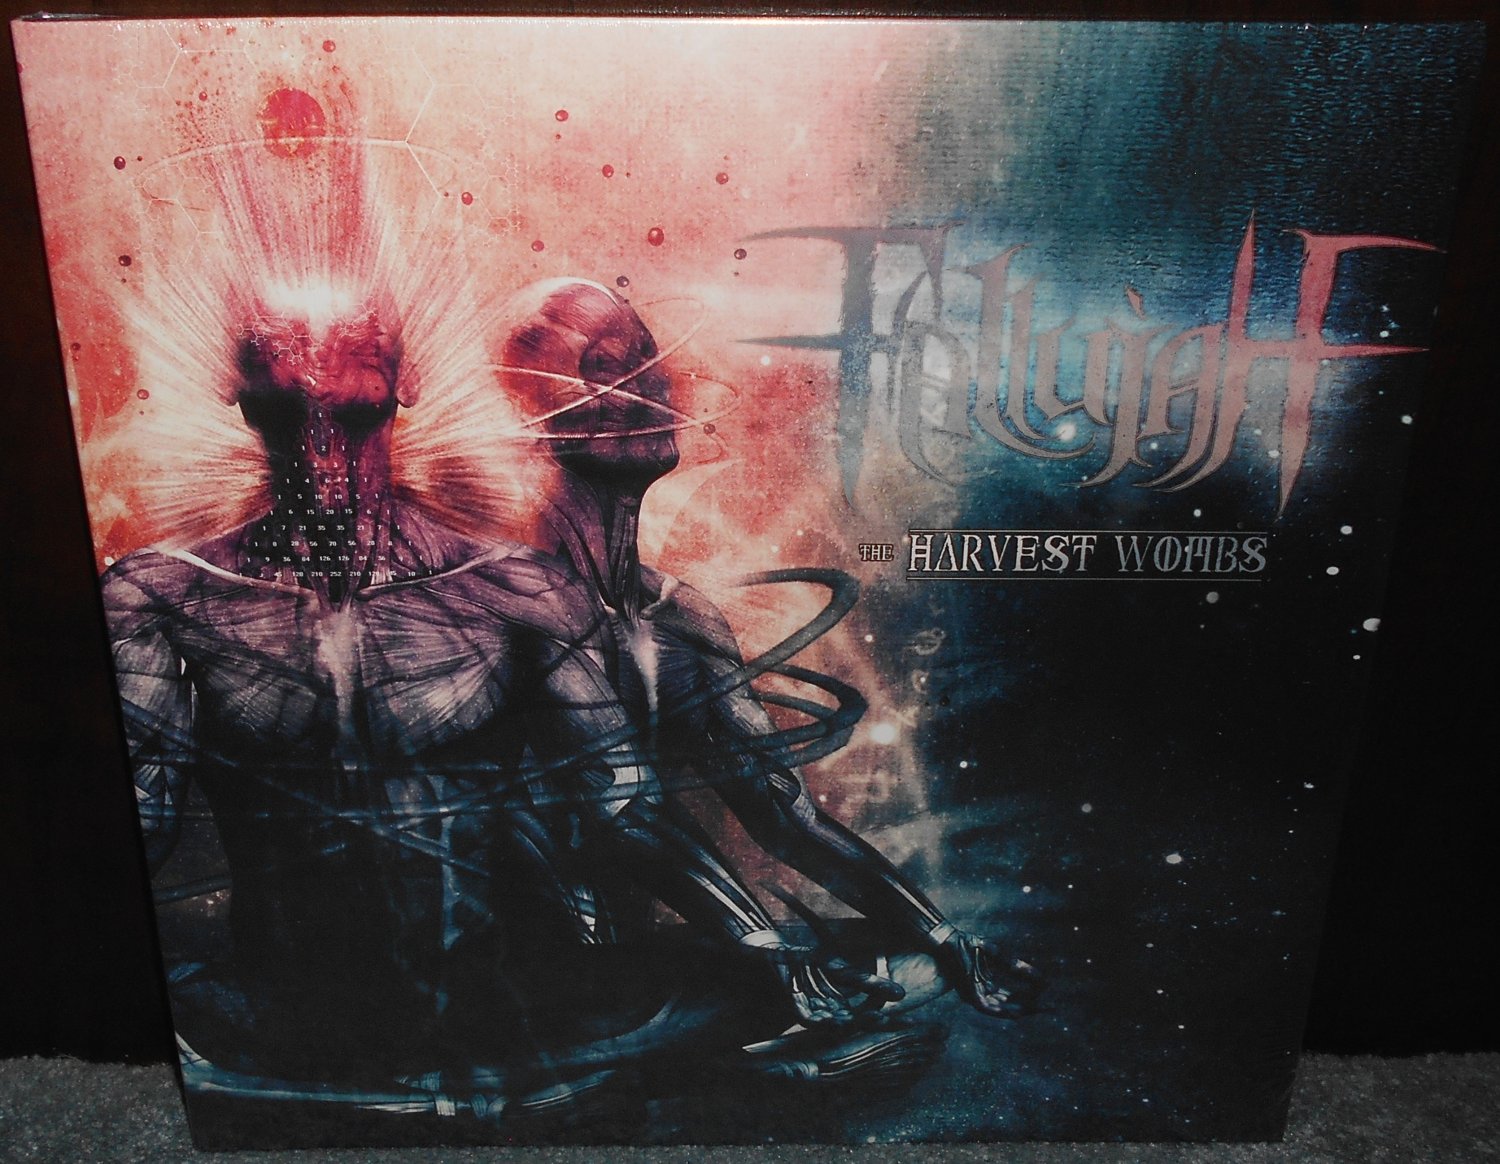 Fallujah The Harvest Wombs Vinyl LP Sealed New Record Store Day RSD 2021 Metal